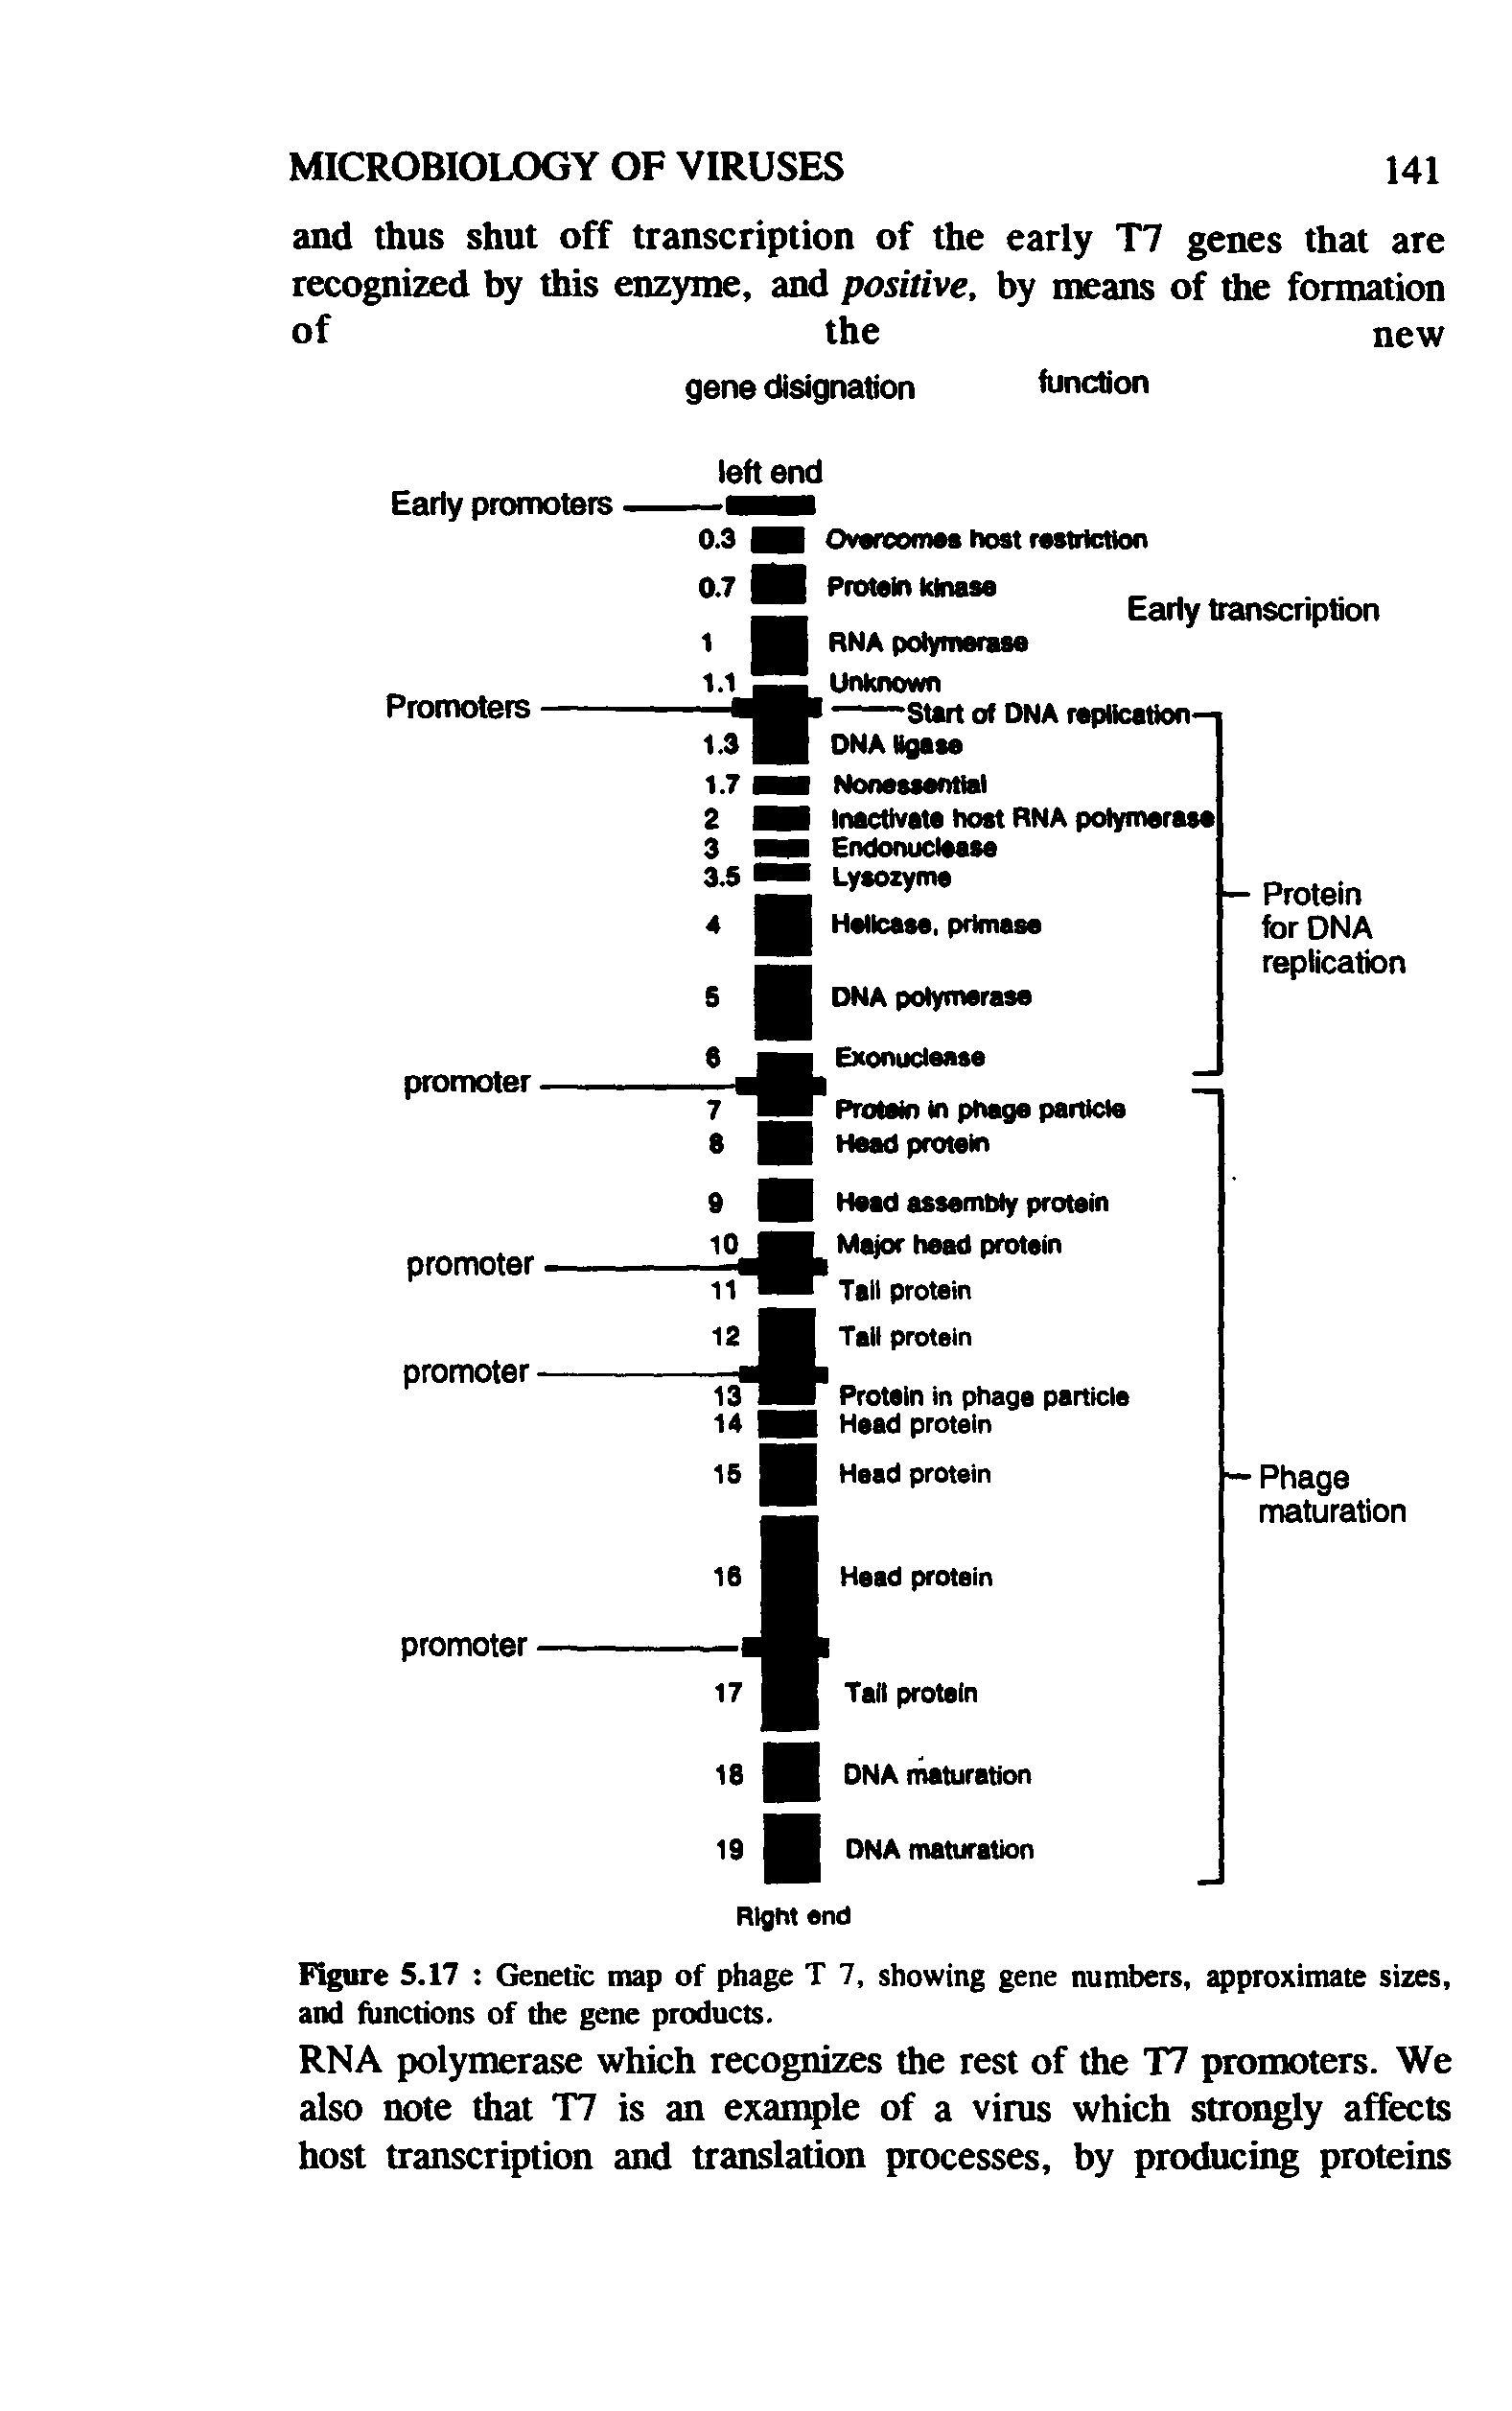 Figure 5.17 Genetic map of phage T 7, showing gene numbers, approximate sizes, and functions of the gene products.